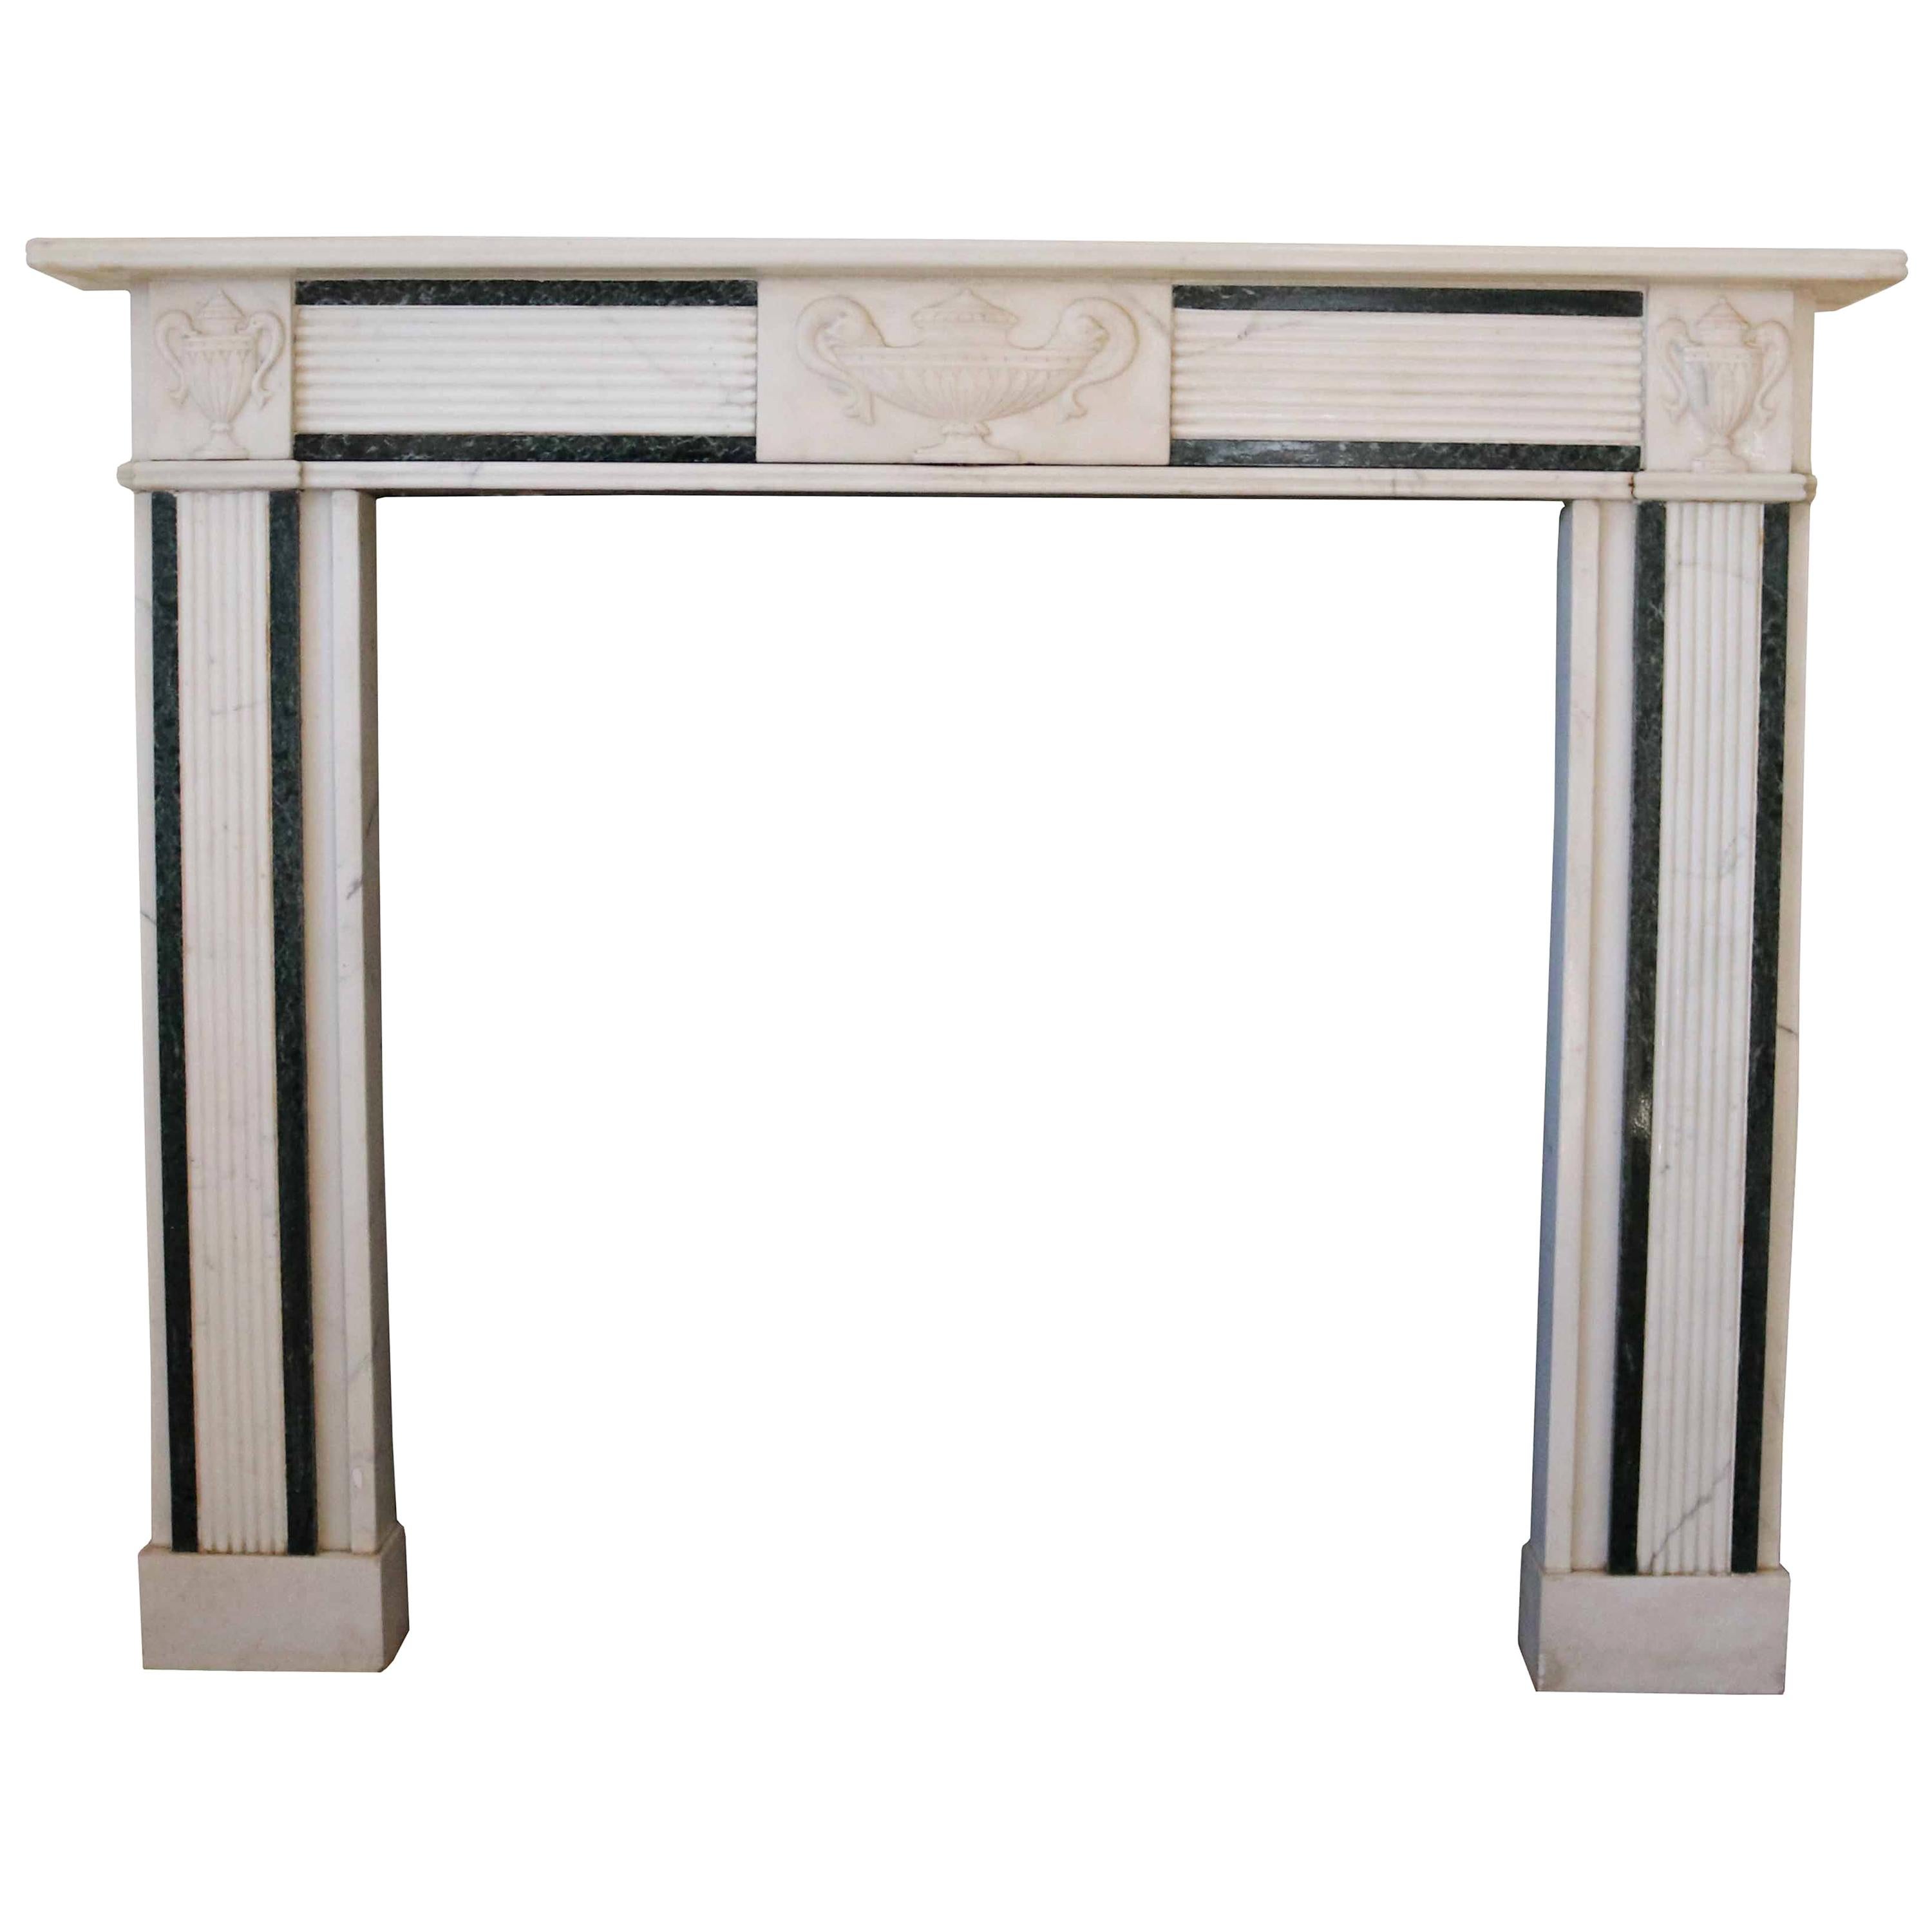 An Antique Georgian Style Marble Fire Surround